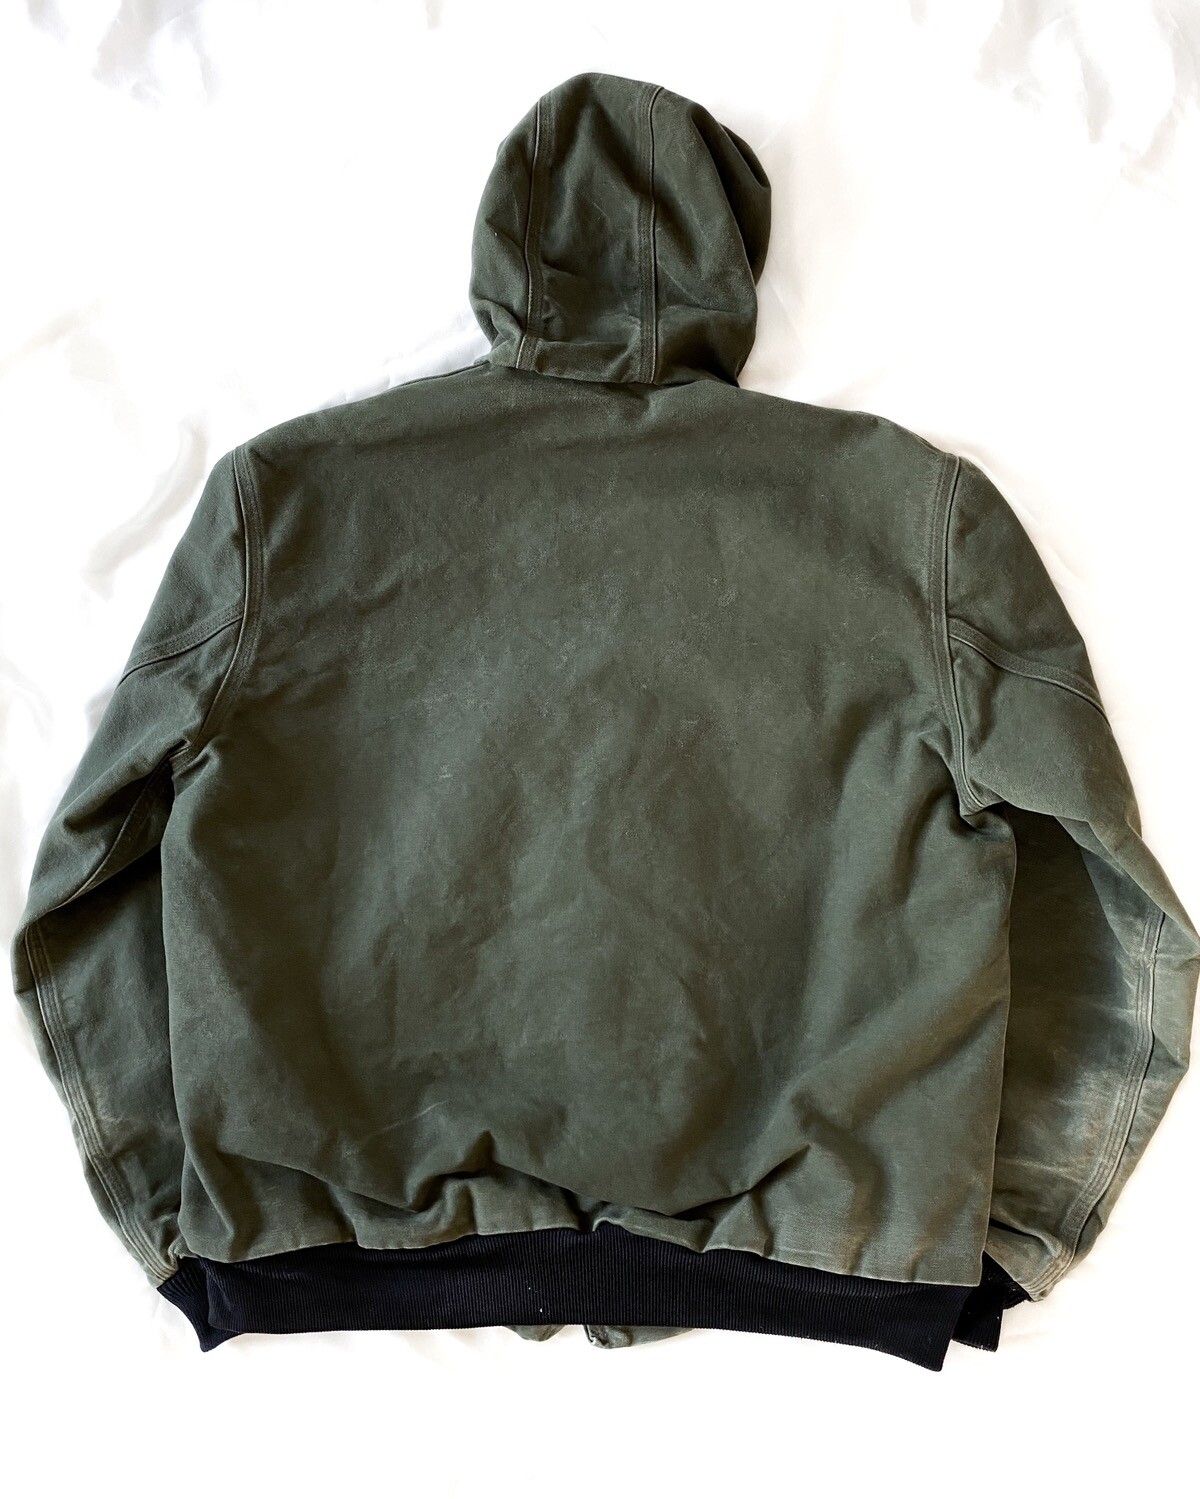 Vintage VINTAGE CARHARTT HOODED ACTIVE JACKET : FOREST GREEN Size US XL / EU 56 / 4 - 2 Preview